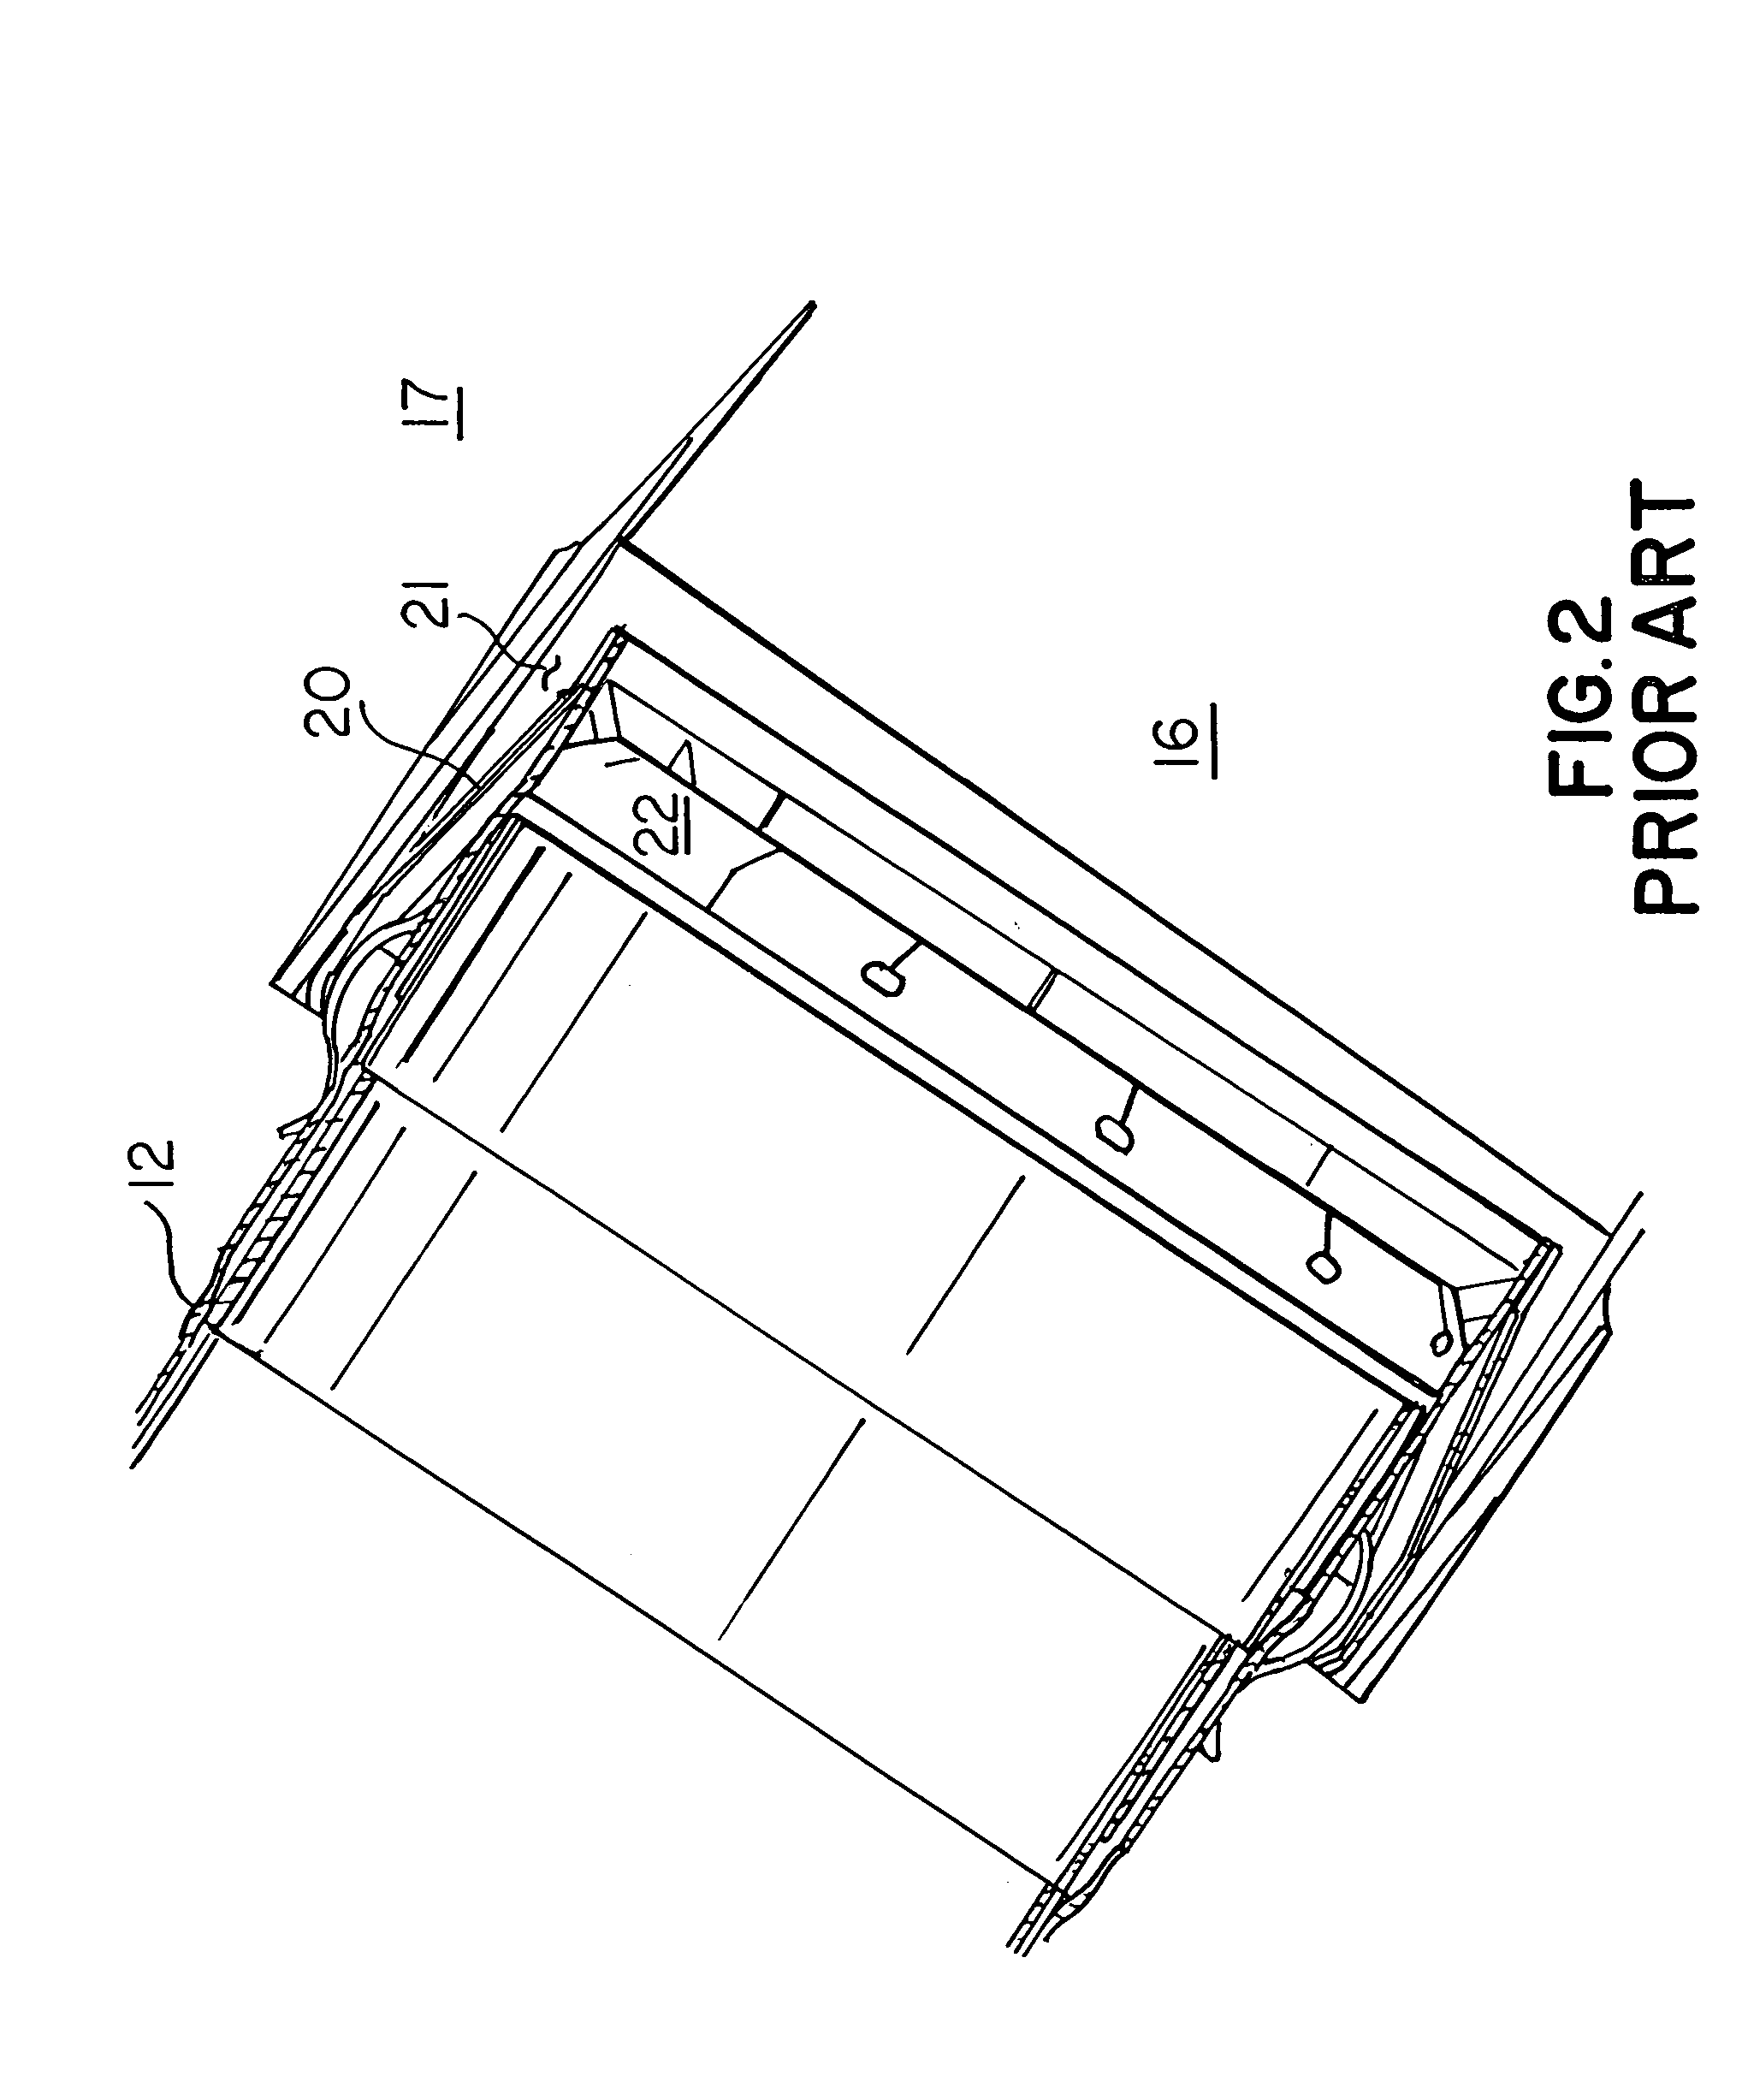 Cooling and sealing design for a gas turbine combustion system